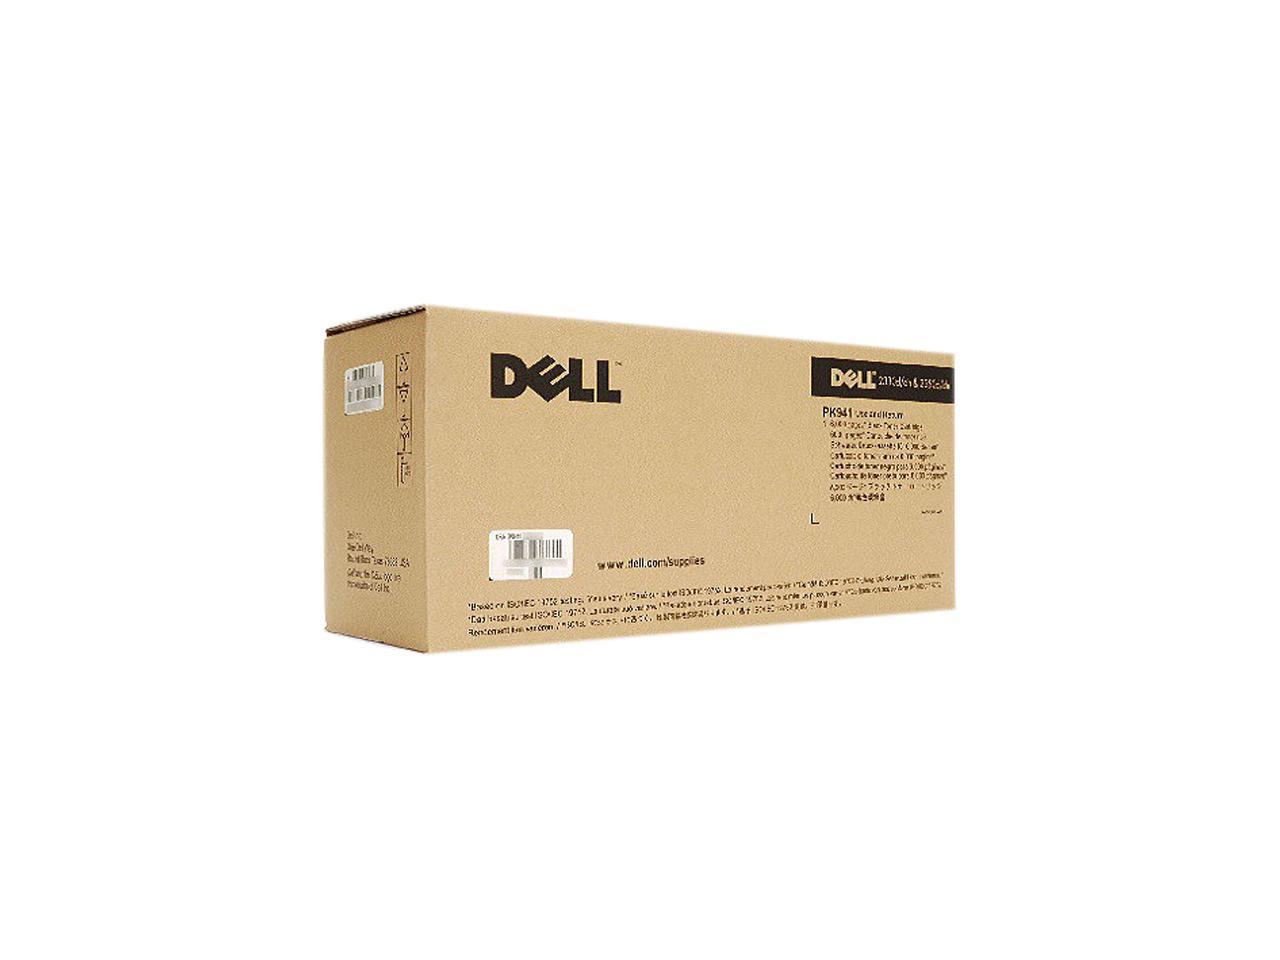 Dell PK941 (Parts # RR700) Toner Cartridge 6,000 Page Yield -Use and Return; Black (330-2650)